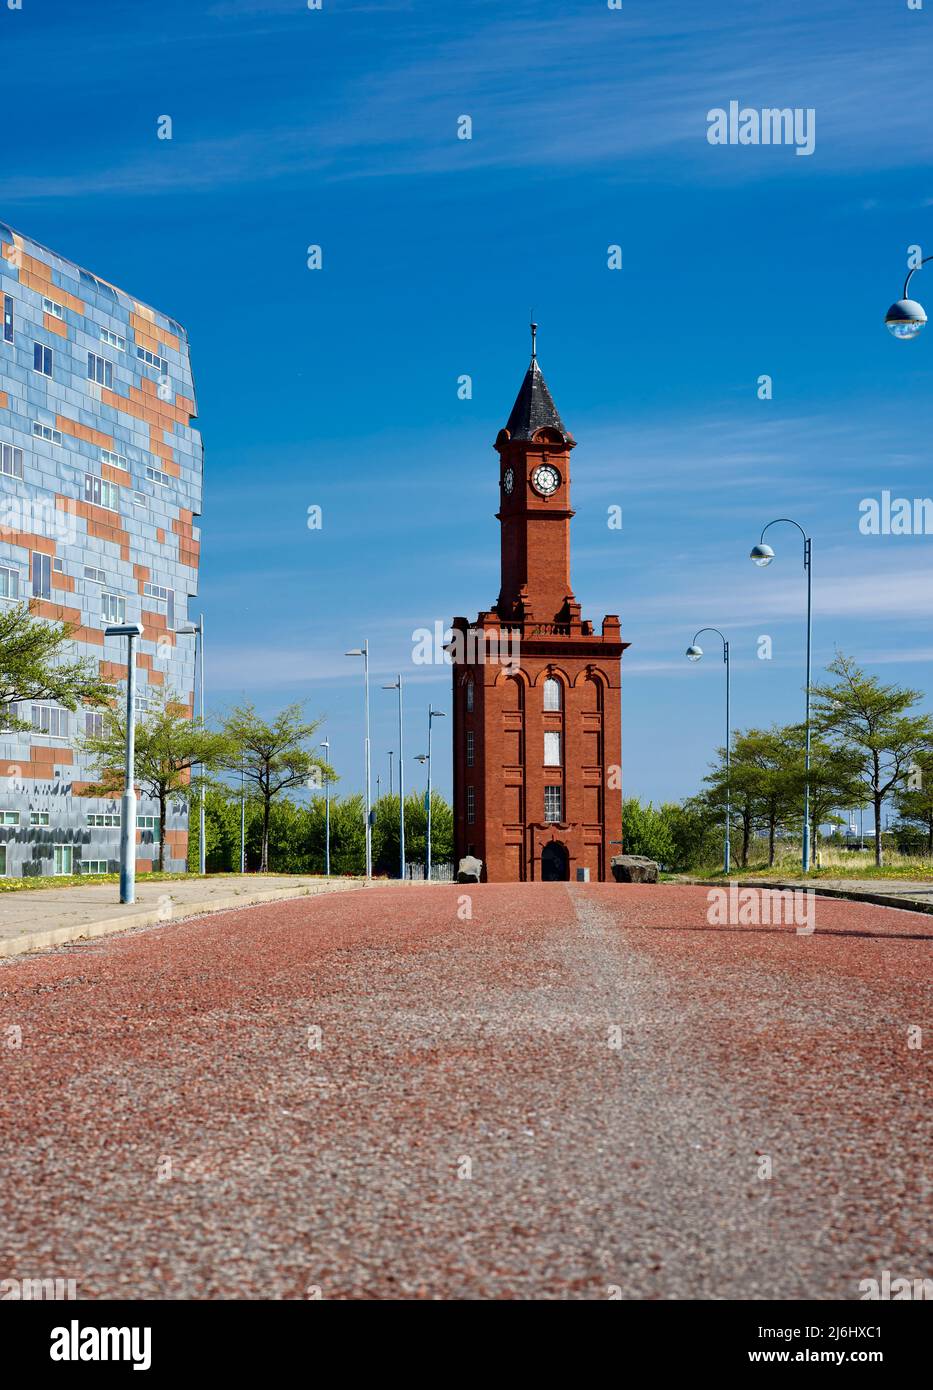 Torre dell'orologio a Middlehaven Middlesbrough Foto Stock